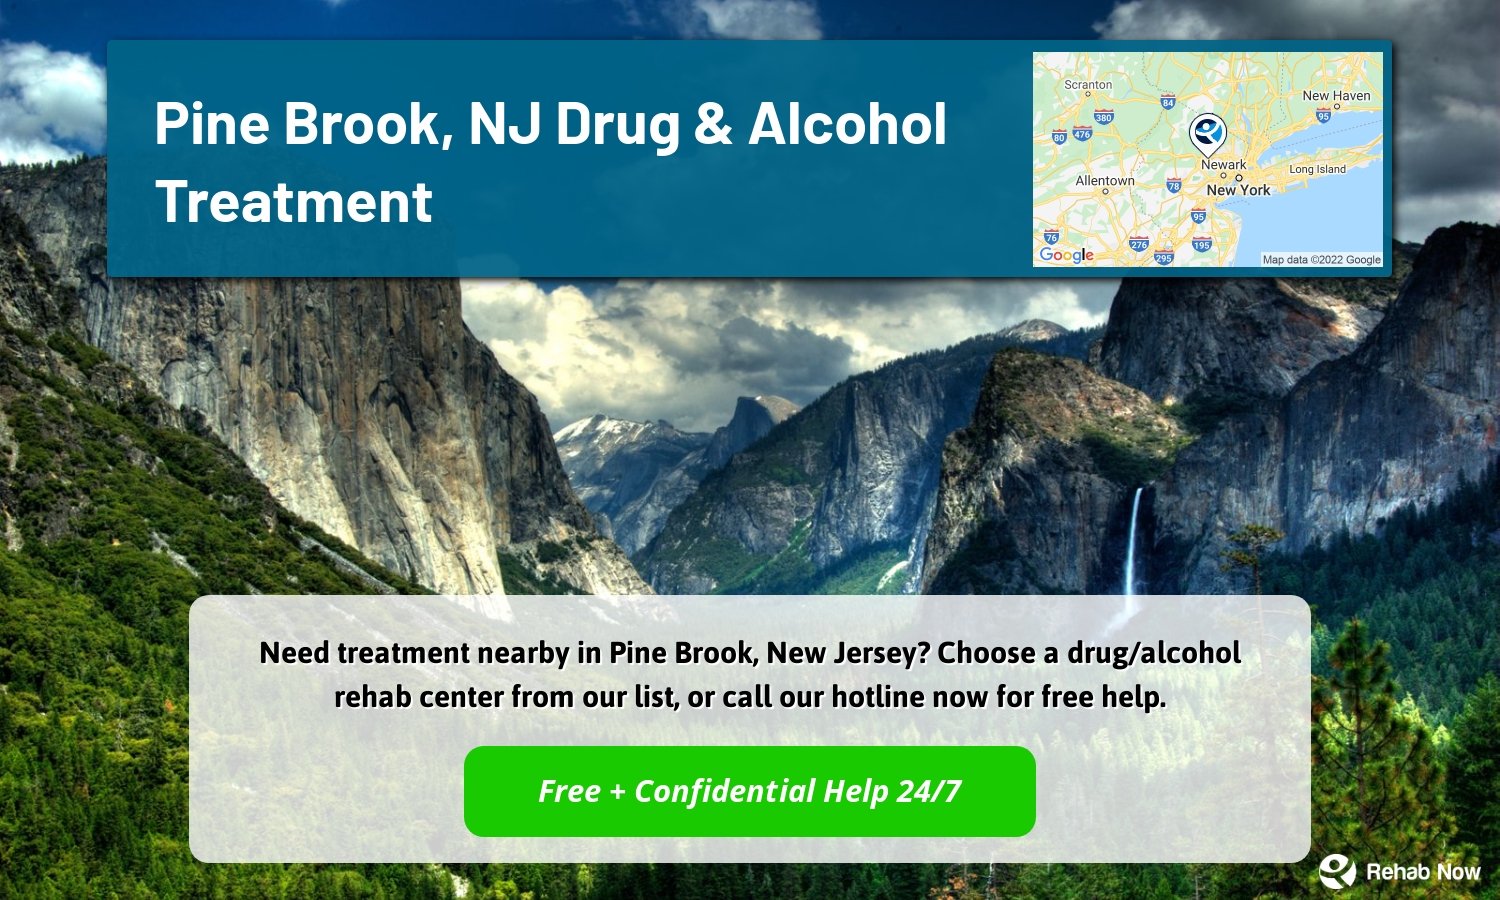 Need treatment nearby in Pine Brook, New Jersey? Choose a drug/alcohol rehab center from our list, or call our hotline now for free help.